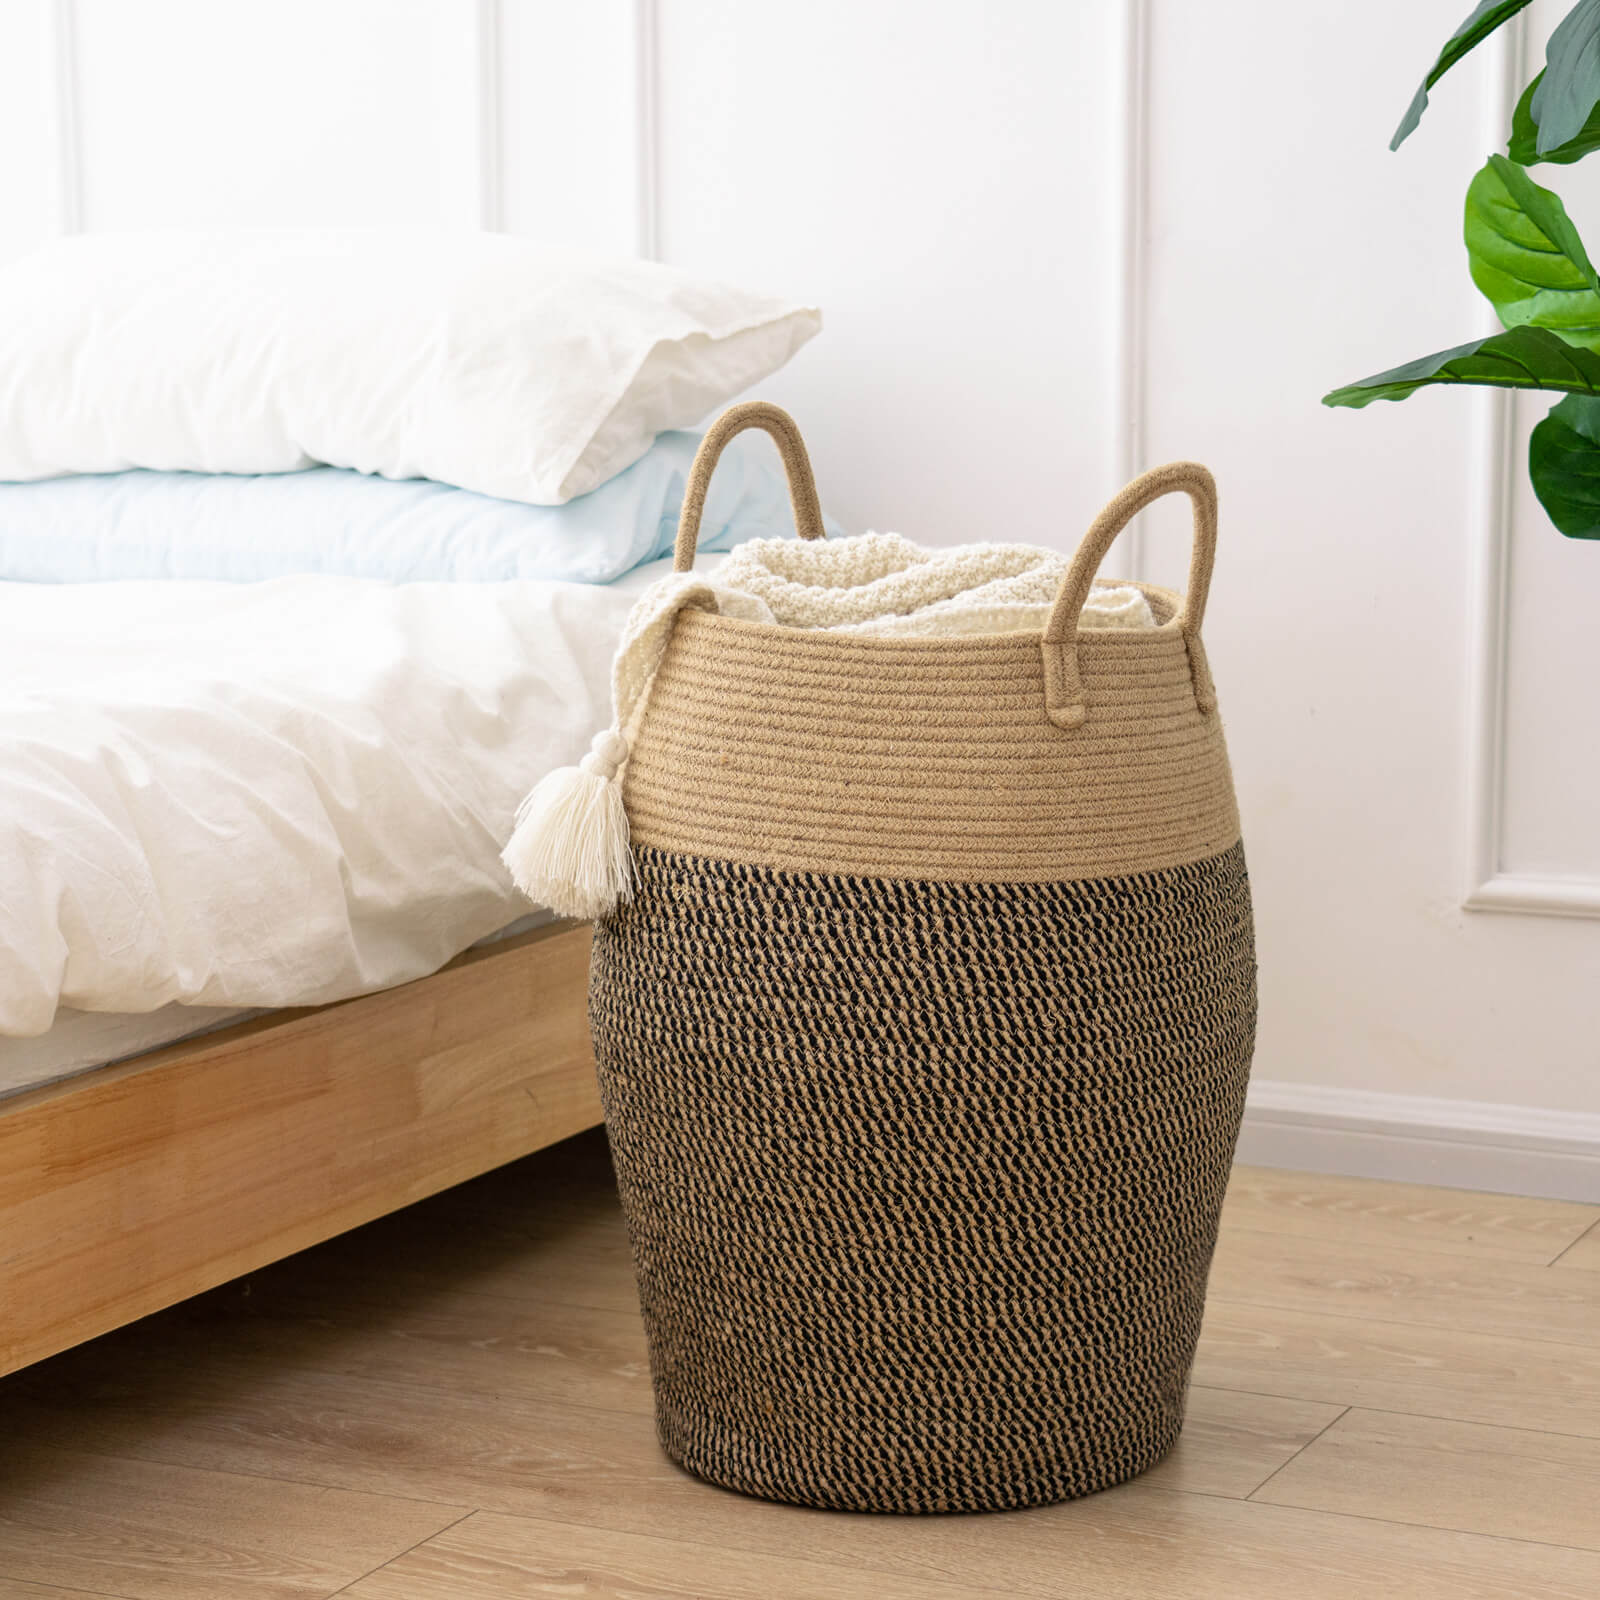 Goodpick Tall Wicker Laundry Basket with Handles